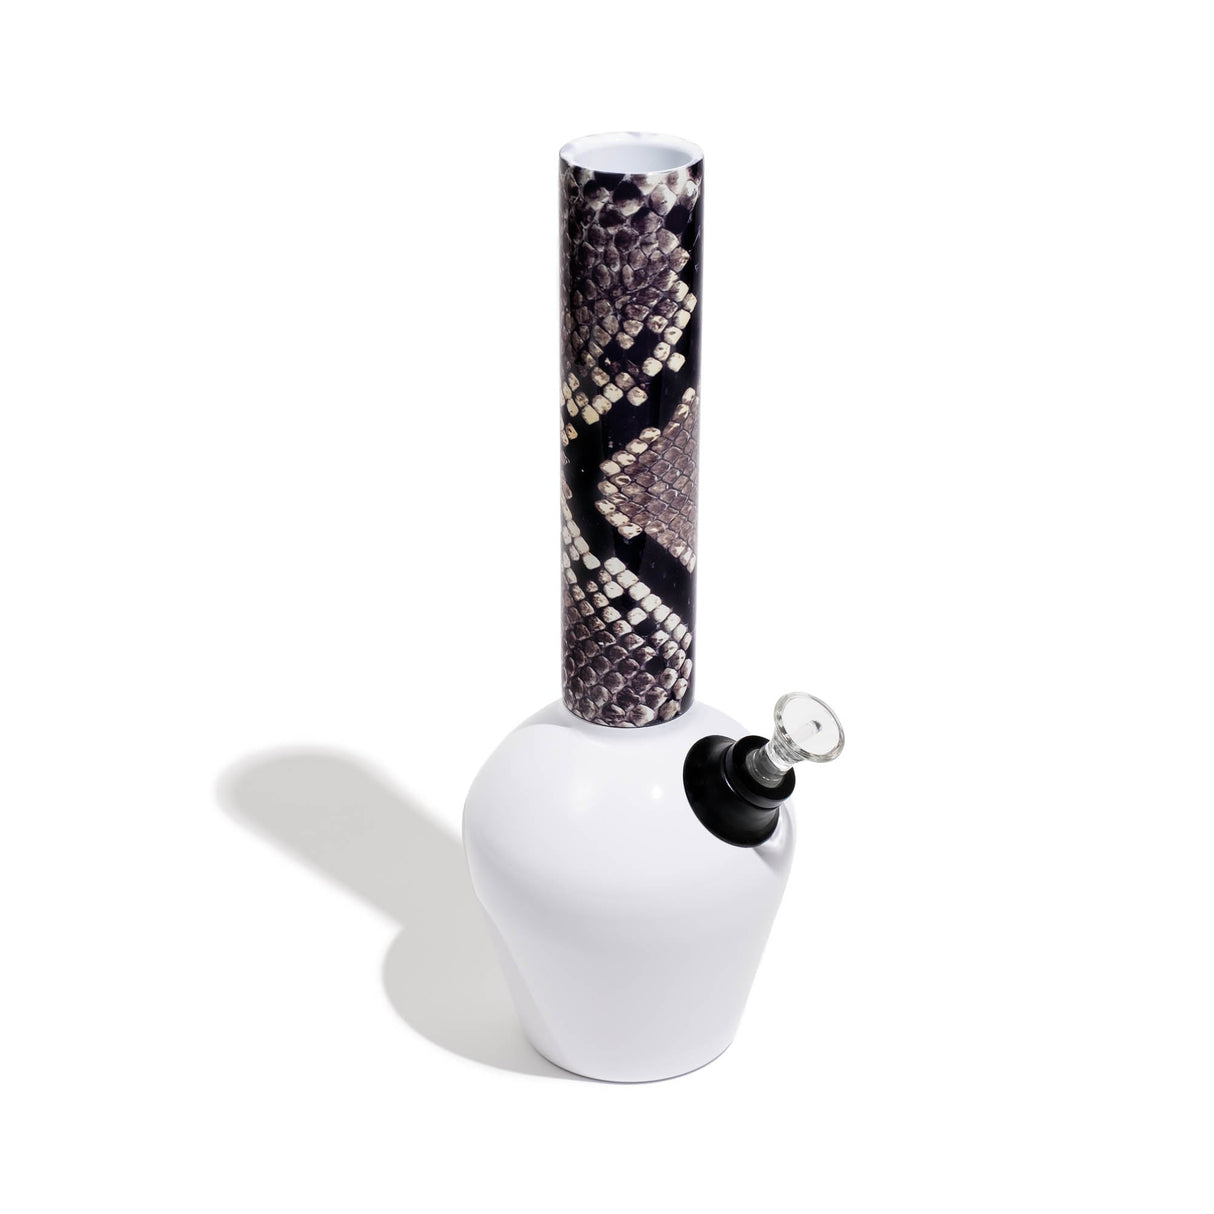 Chill Mix & Match Series bong with gloss white base and patterned tube, angled view